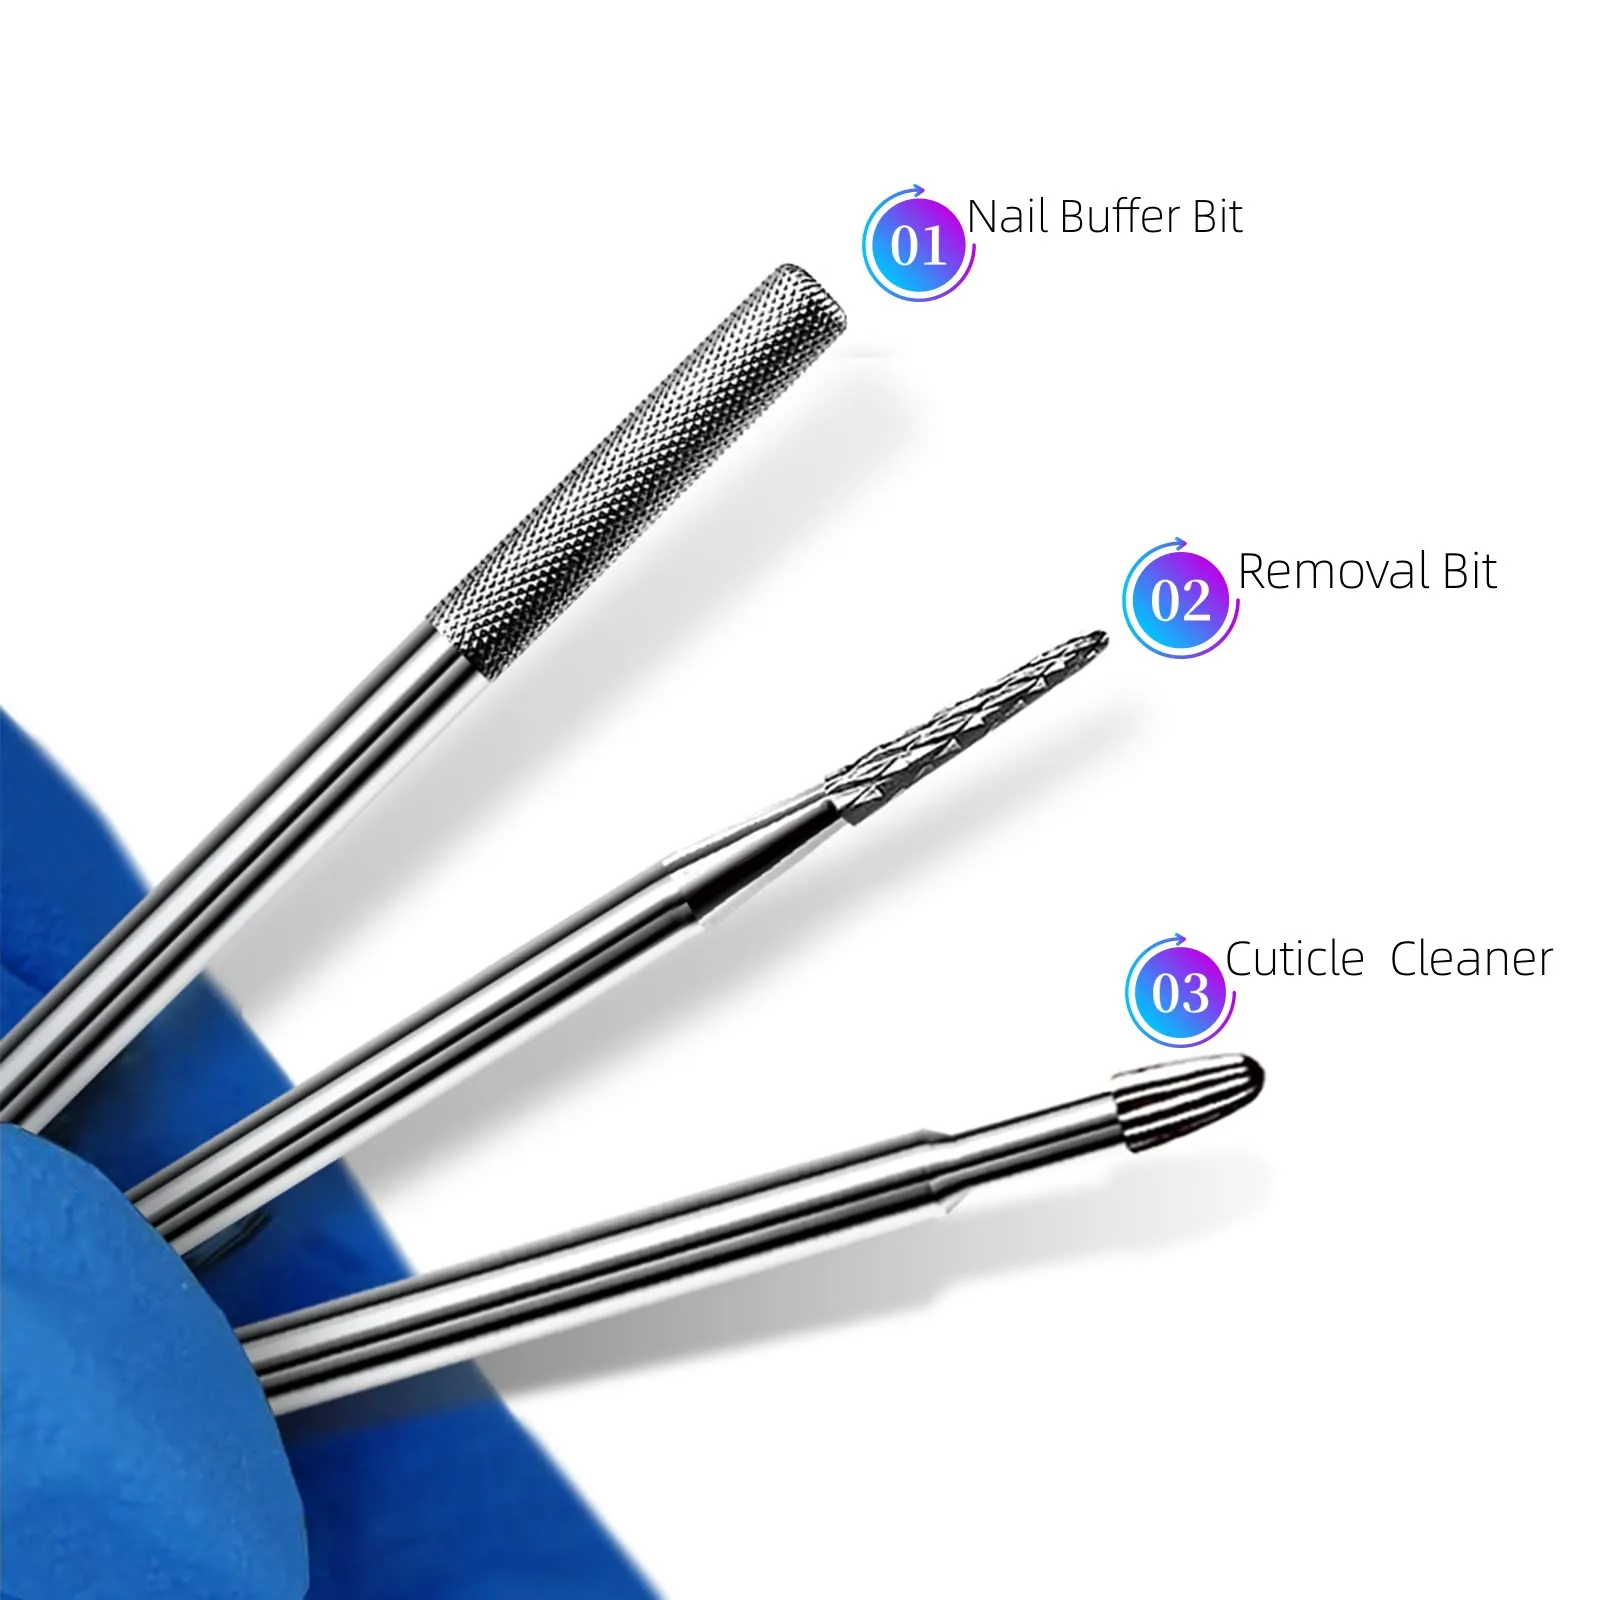 

Cuticle Drill Bit for Nails Tungsten Carbide E-file Bit 3/32" Nail Buffer Bit Under Nail Cleaner Nail Supplies for Professionals